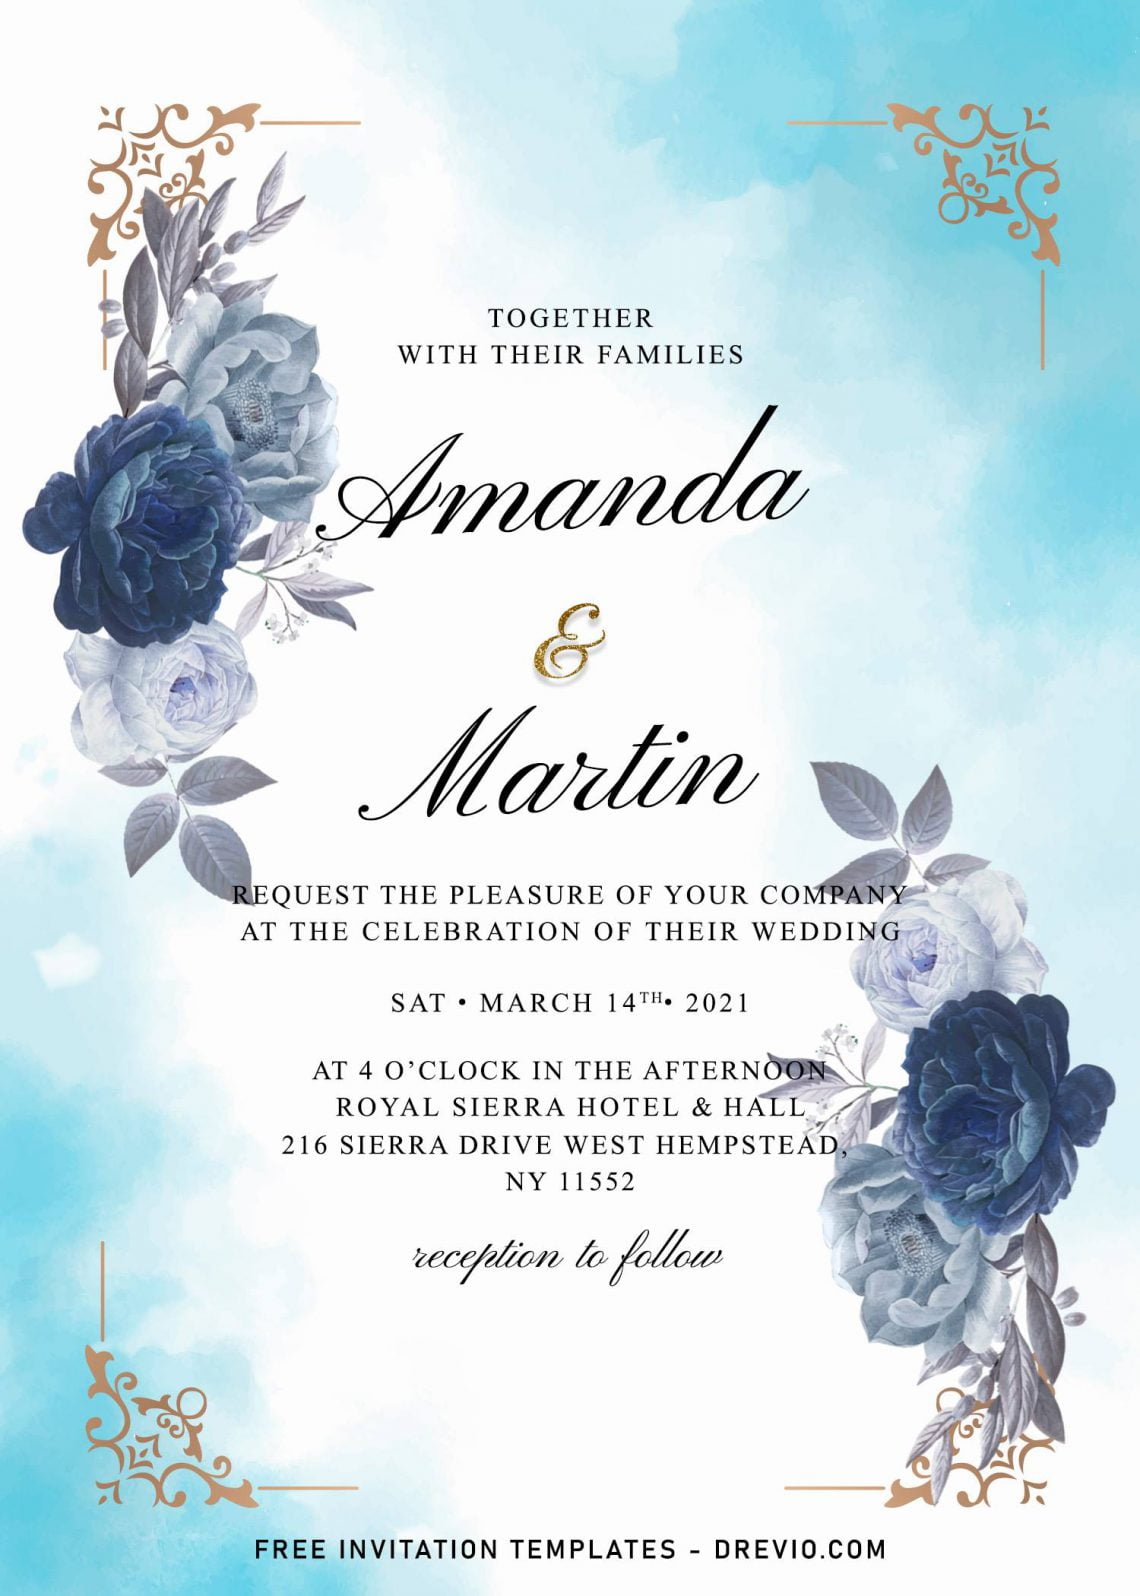 party invitation card template free download